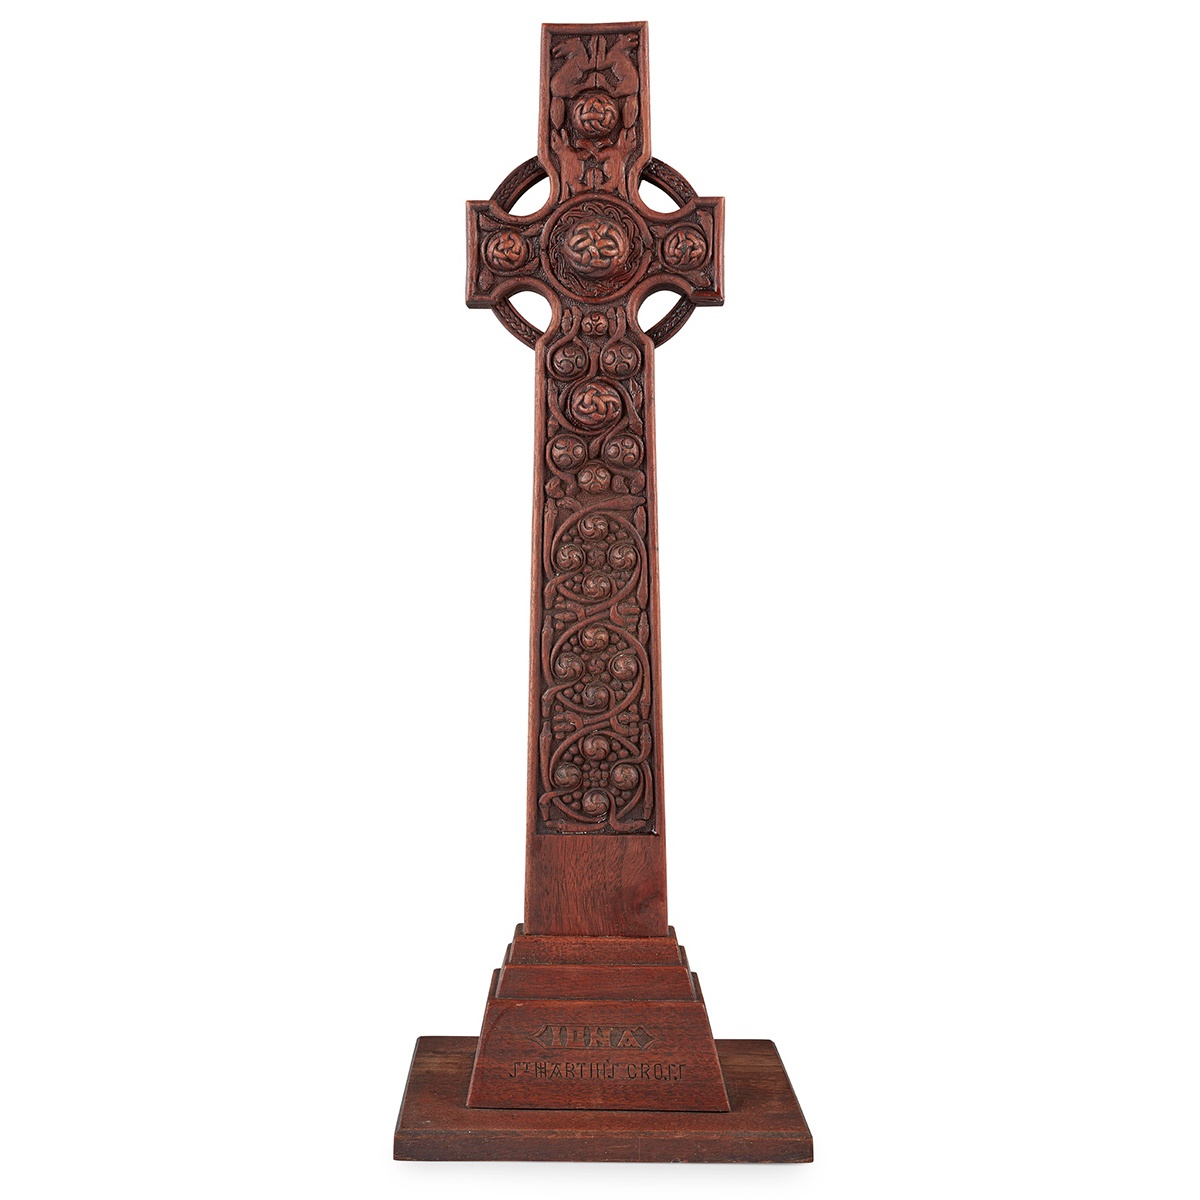 LOT 239 | IONA - A SCOTTISH PROVINCIAL LARGE OAK ST. MARTIN'S STANDING CROSS | ALEXANDER RITCHIE | £1,000 - £1,500 + fees